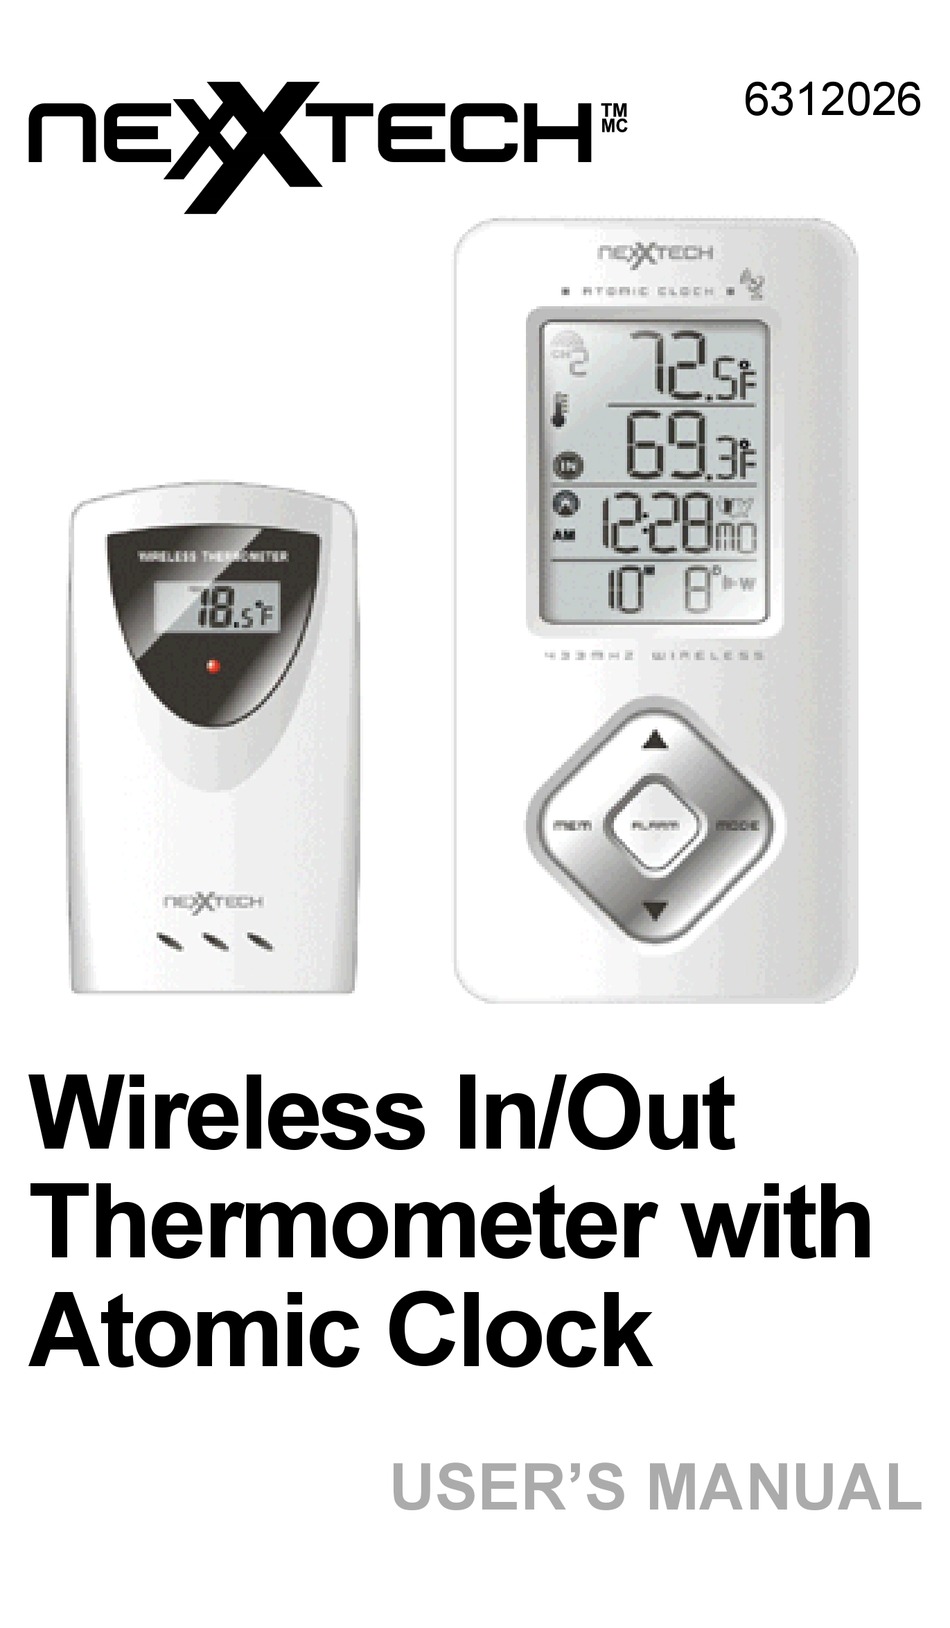 Combustion Inc 1002 Display and Range Extender for Wireless Cooking  Thermometer User Guide